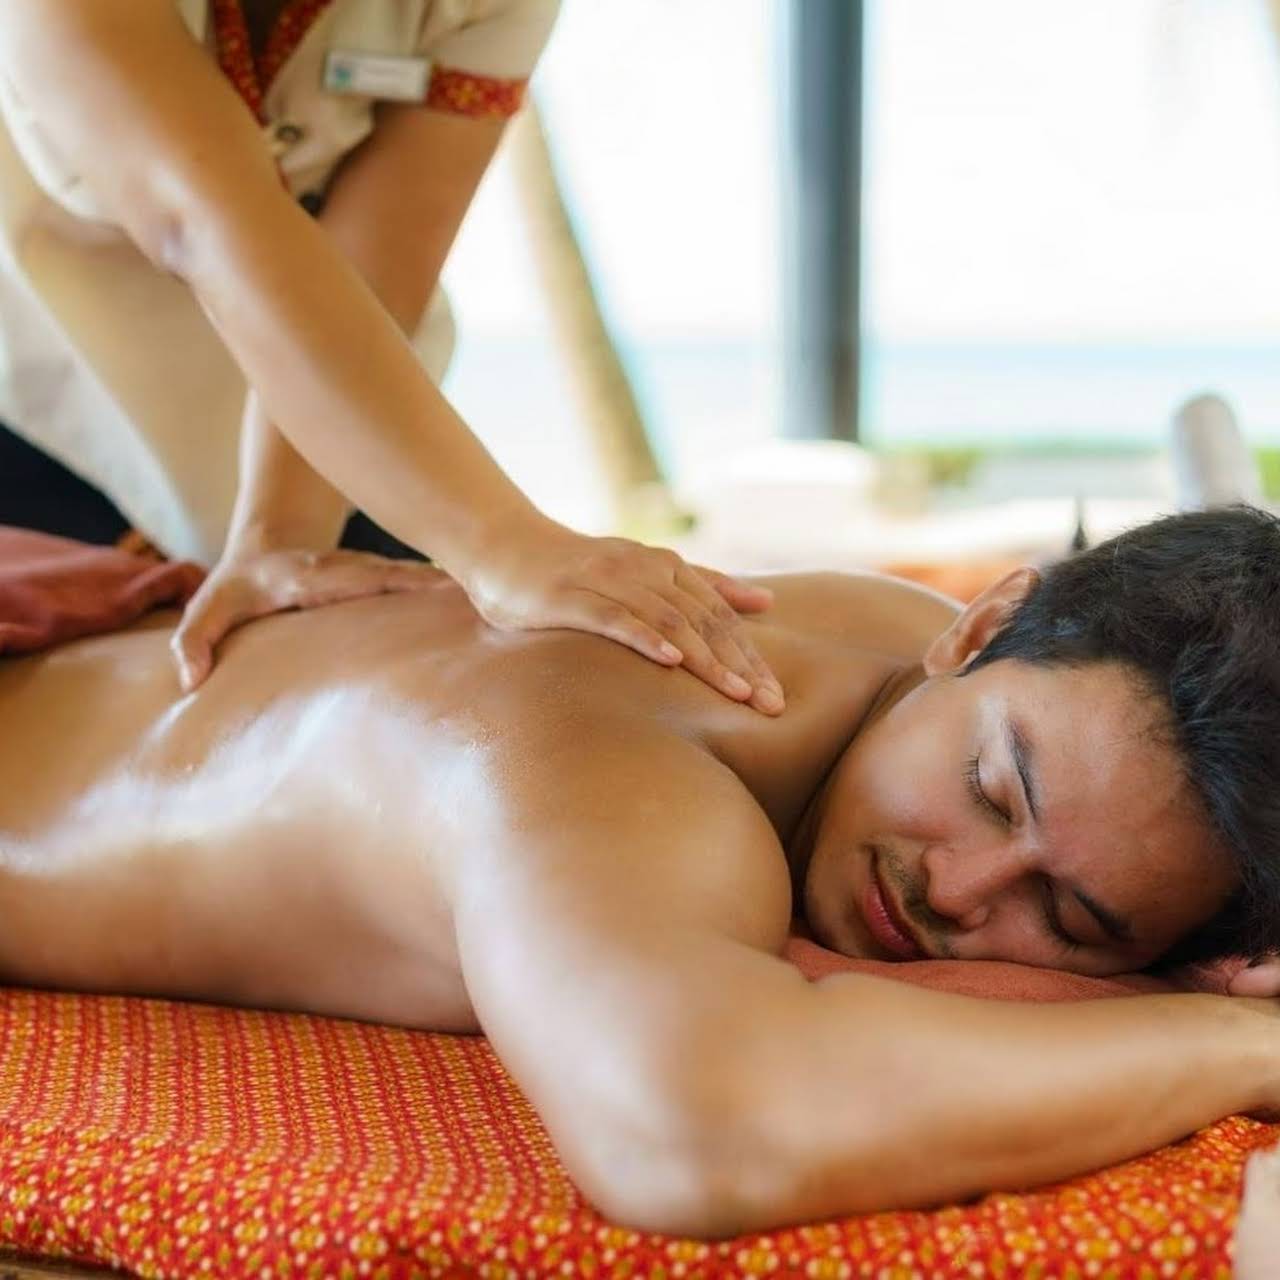 Body to body massage by girls Vaishali Nagar 7568798332,Jaipur,Services,Free Classifieds,Post Free Ads,77traders.com